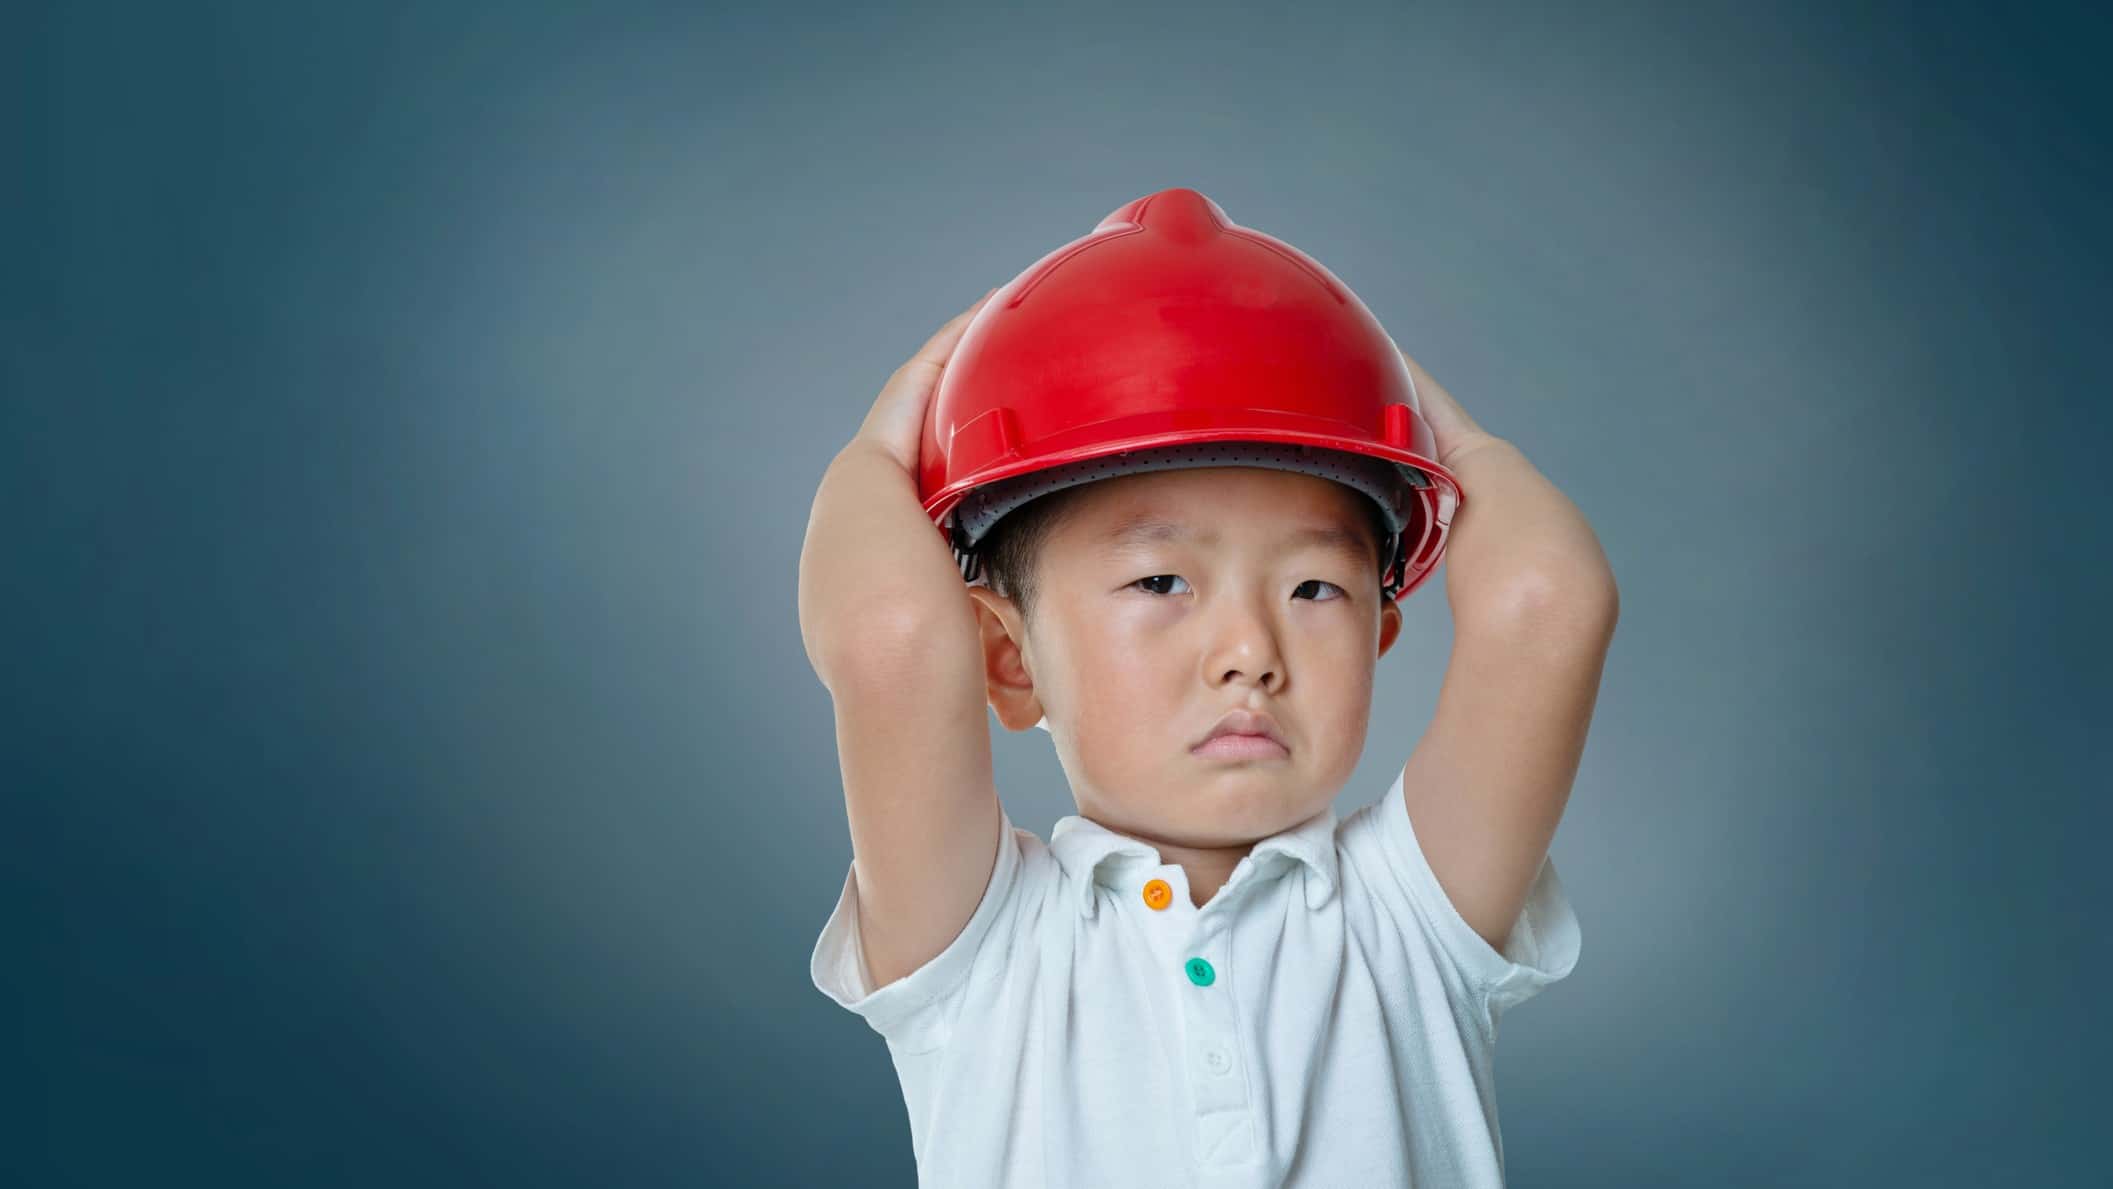 Fortescue Metals share price falls. young boy wearing a hard hat frowning with his hands on his head.